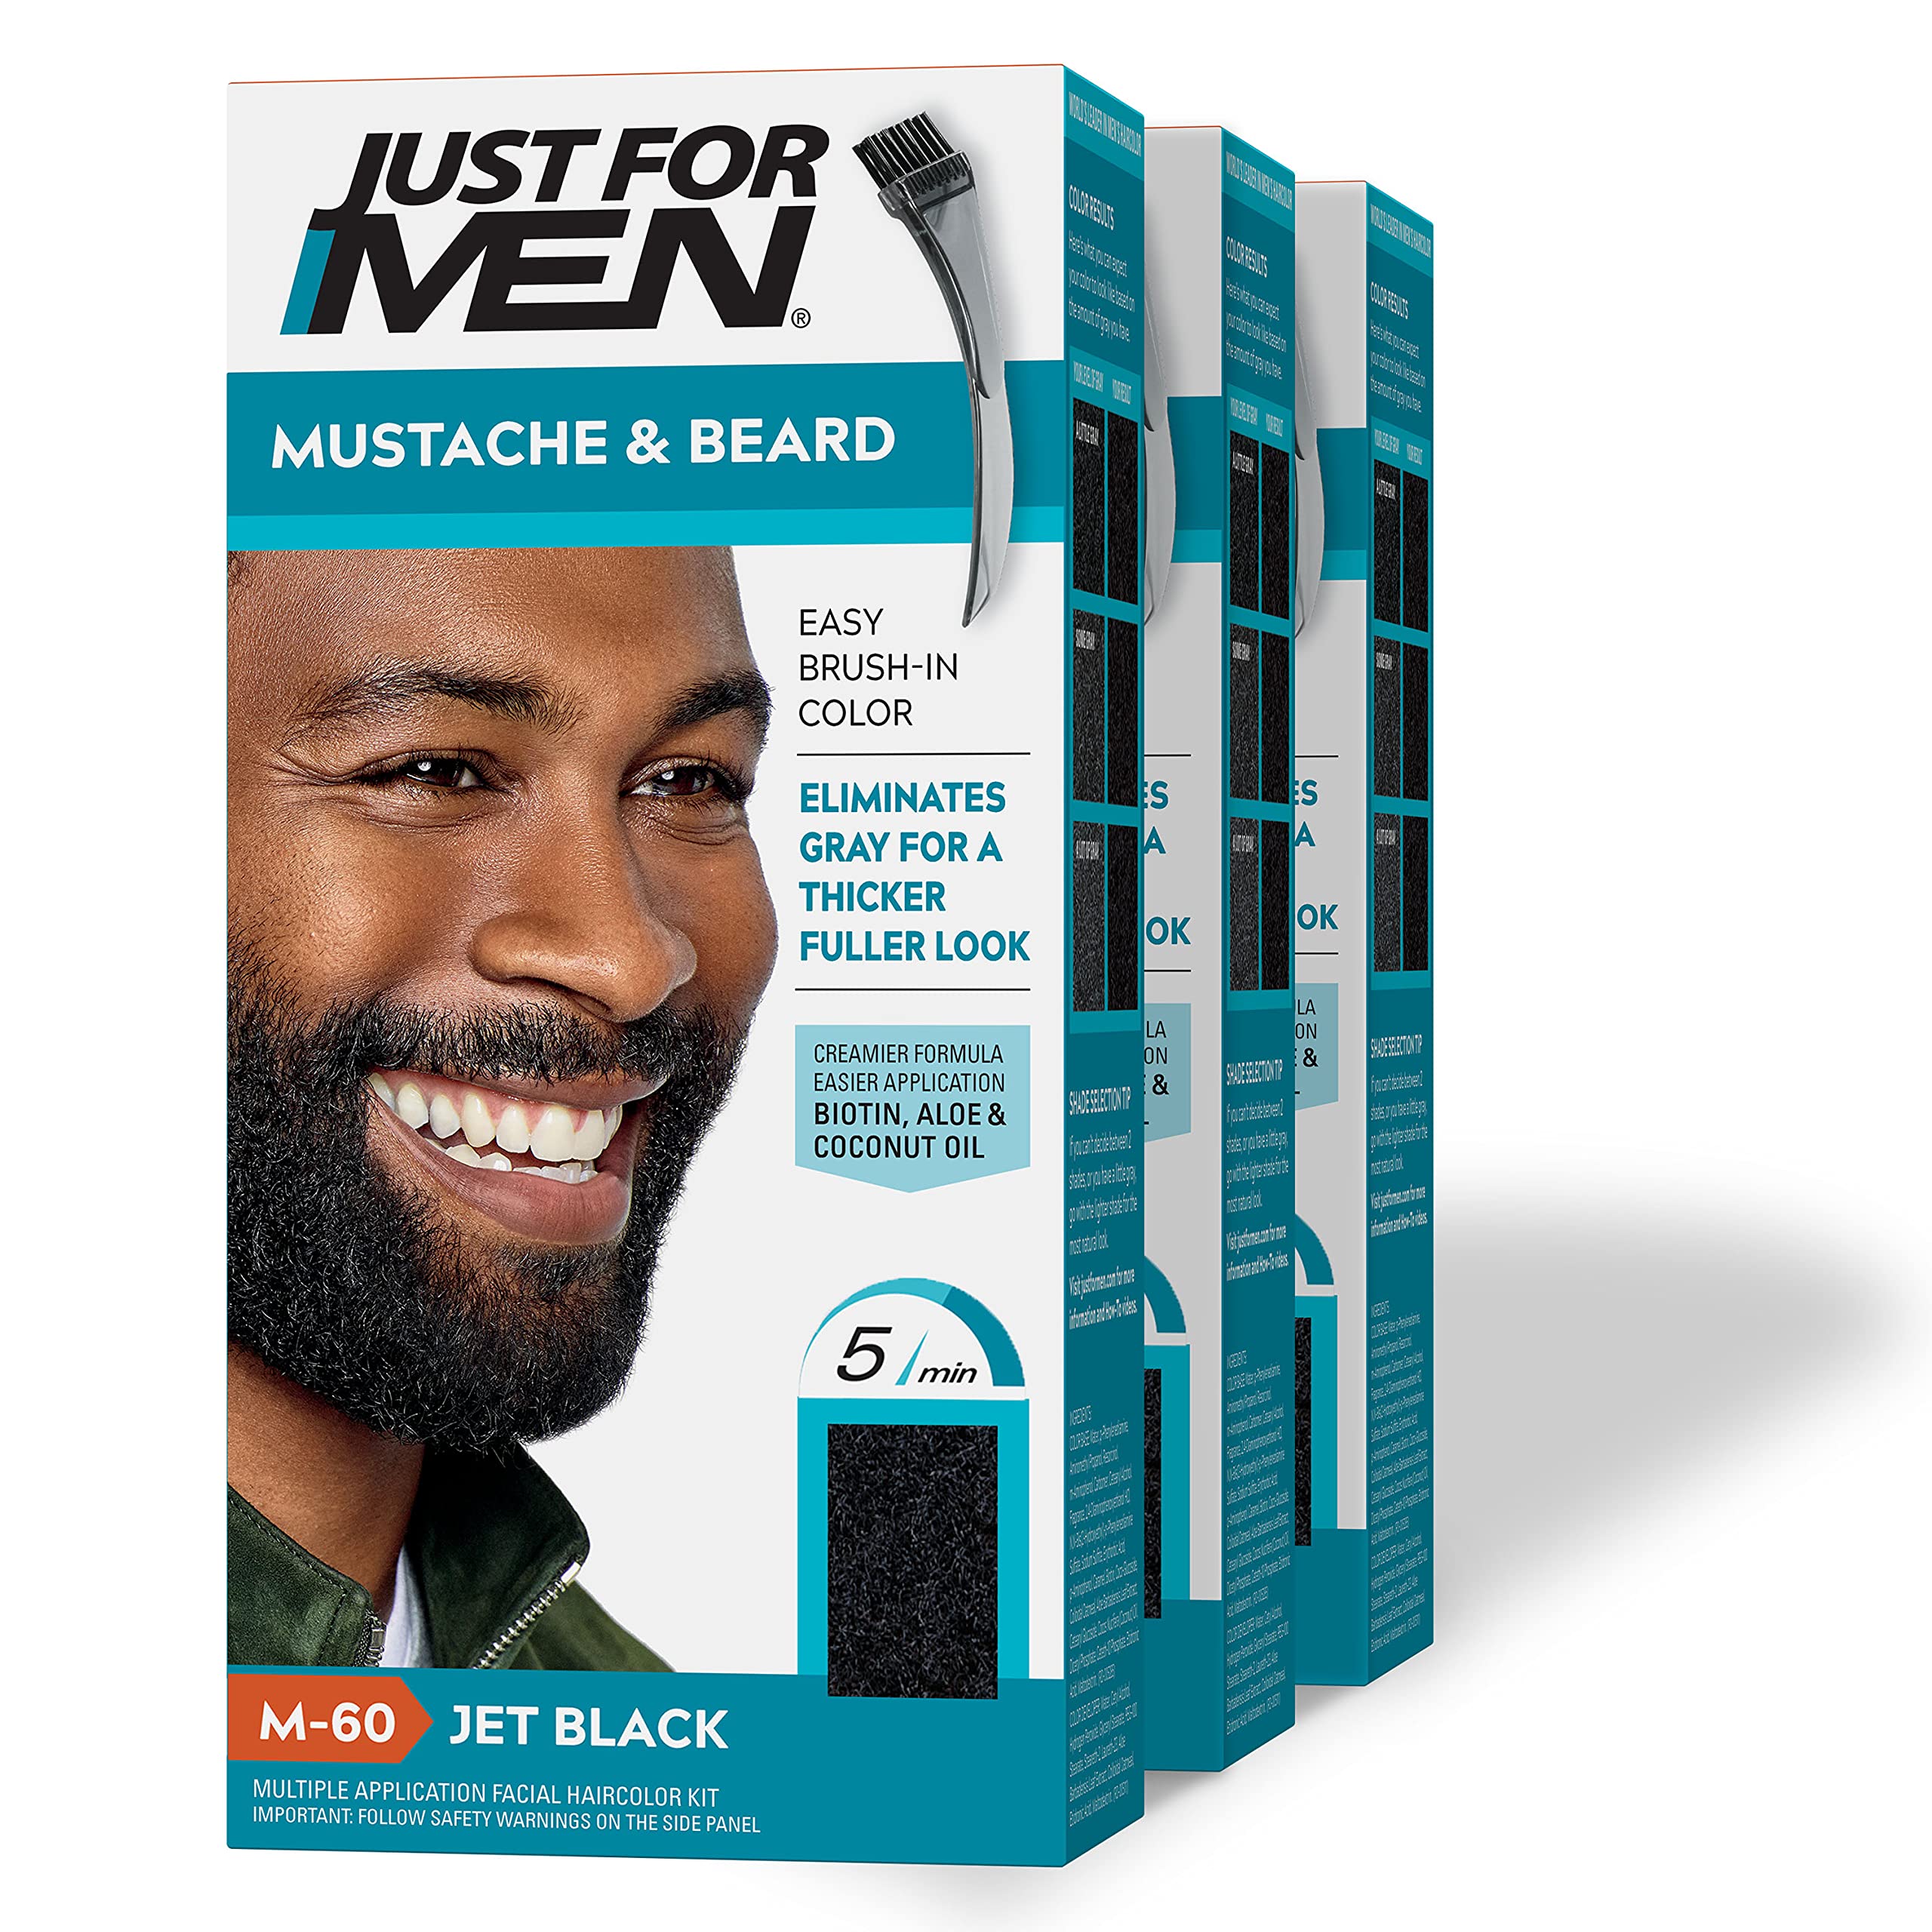 Just For Men Mustache & Beard, Beard Dye for Men with Brush Included for Easy Application, With Biotin Aloe and Coconut Oil for Healthy Facial Hair - Jet Black, M-60, Pack of 3